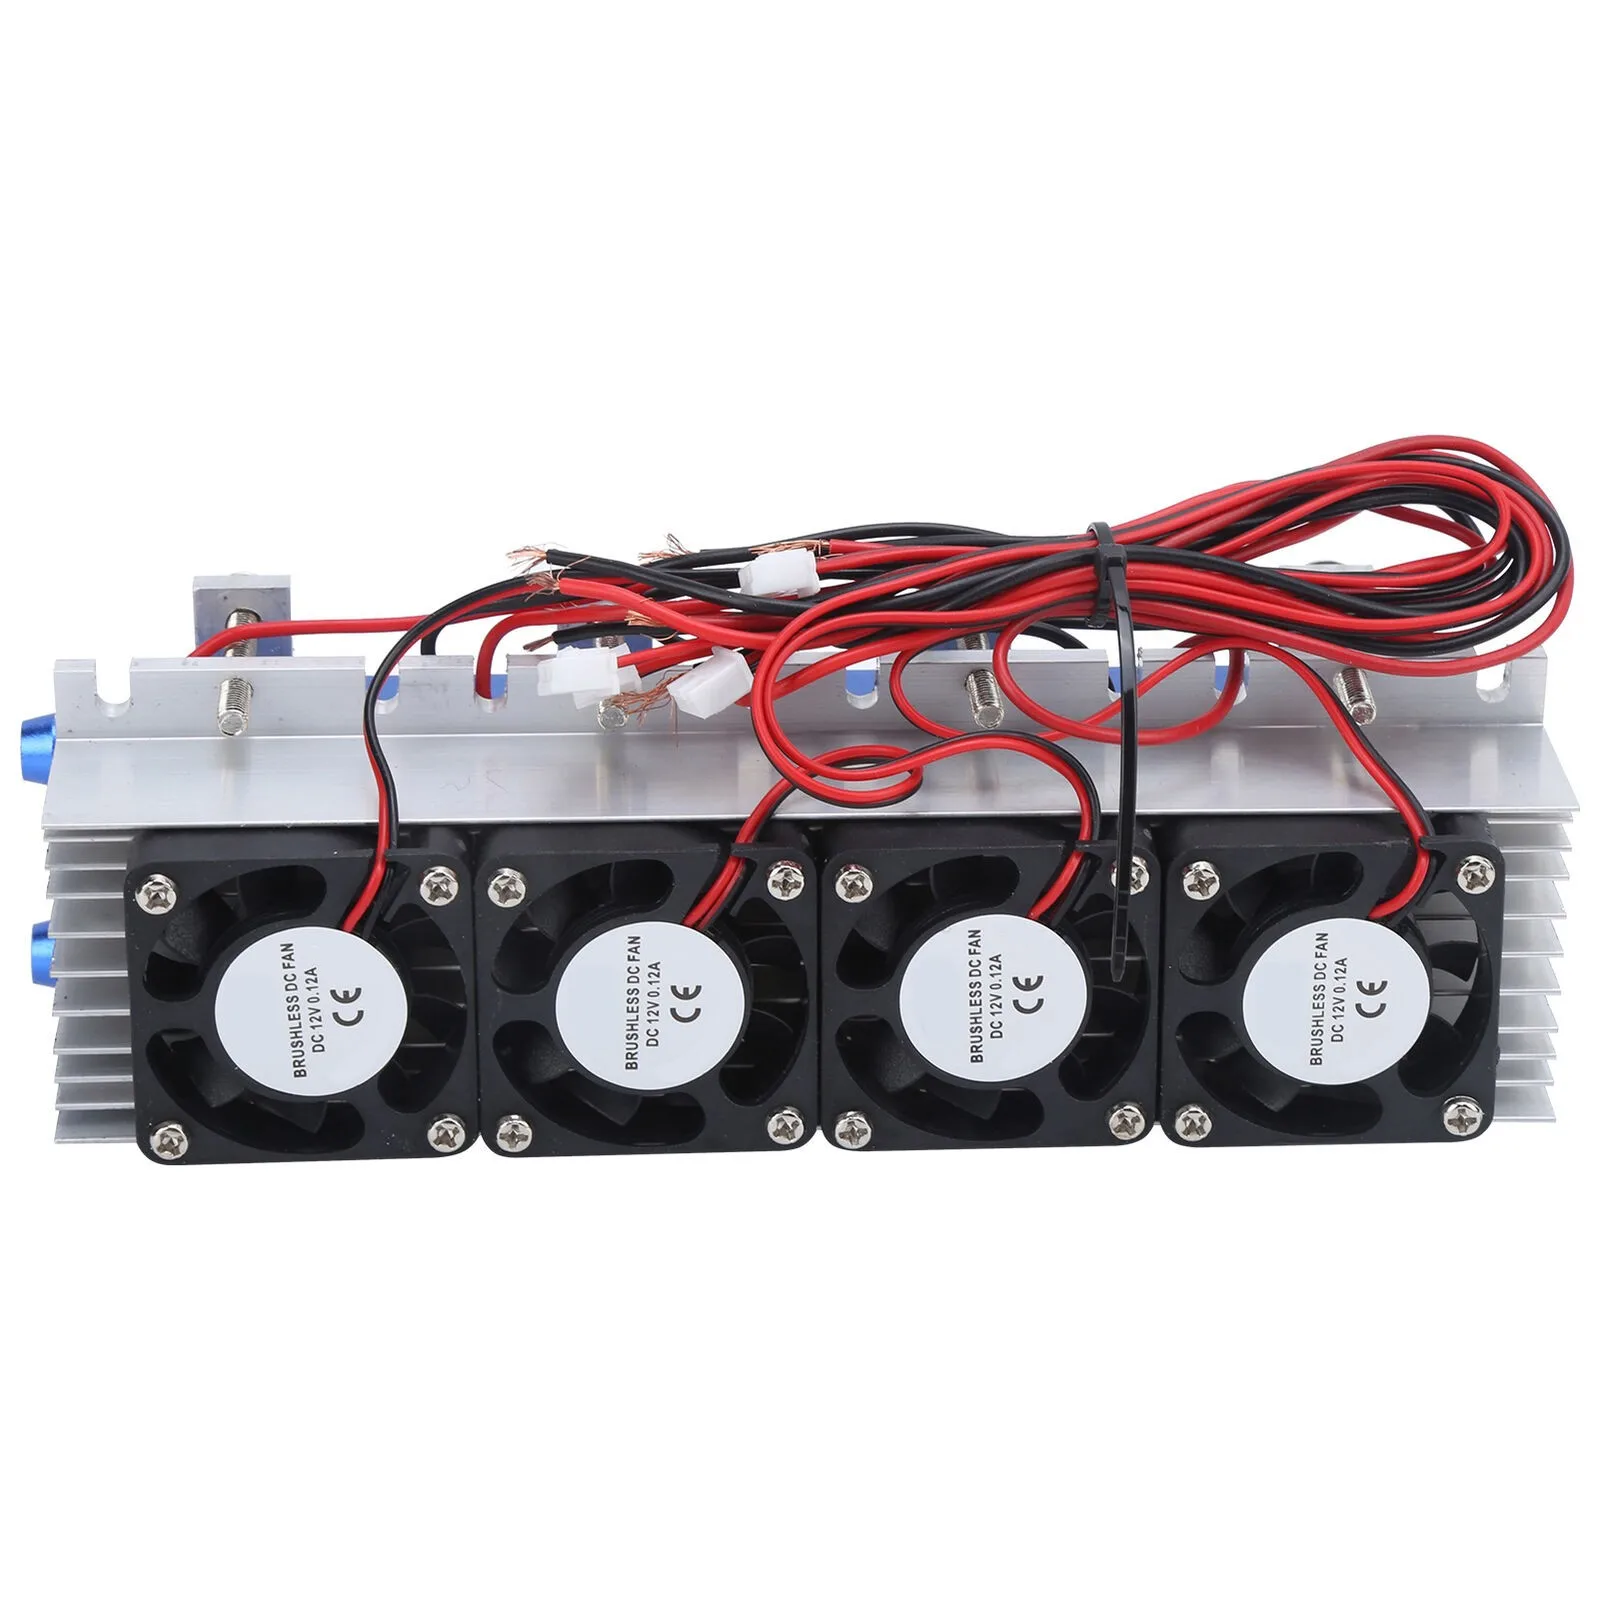 

288W Thermoelectric Peltier Refrigeration Cooler DC12V Semiconductor Air Conditioning Refrigeration Peltier Coolers DIY Kit